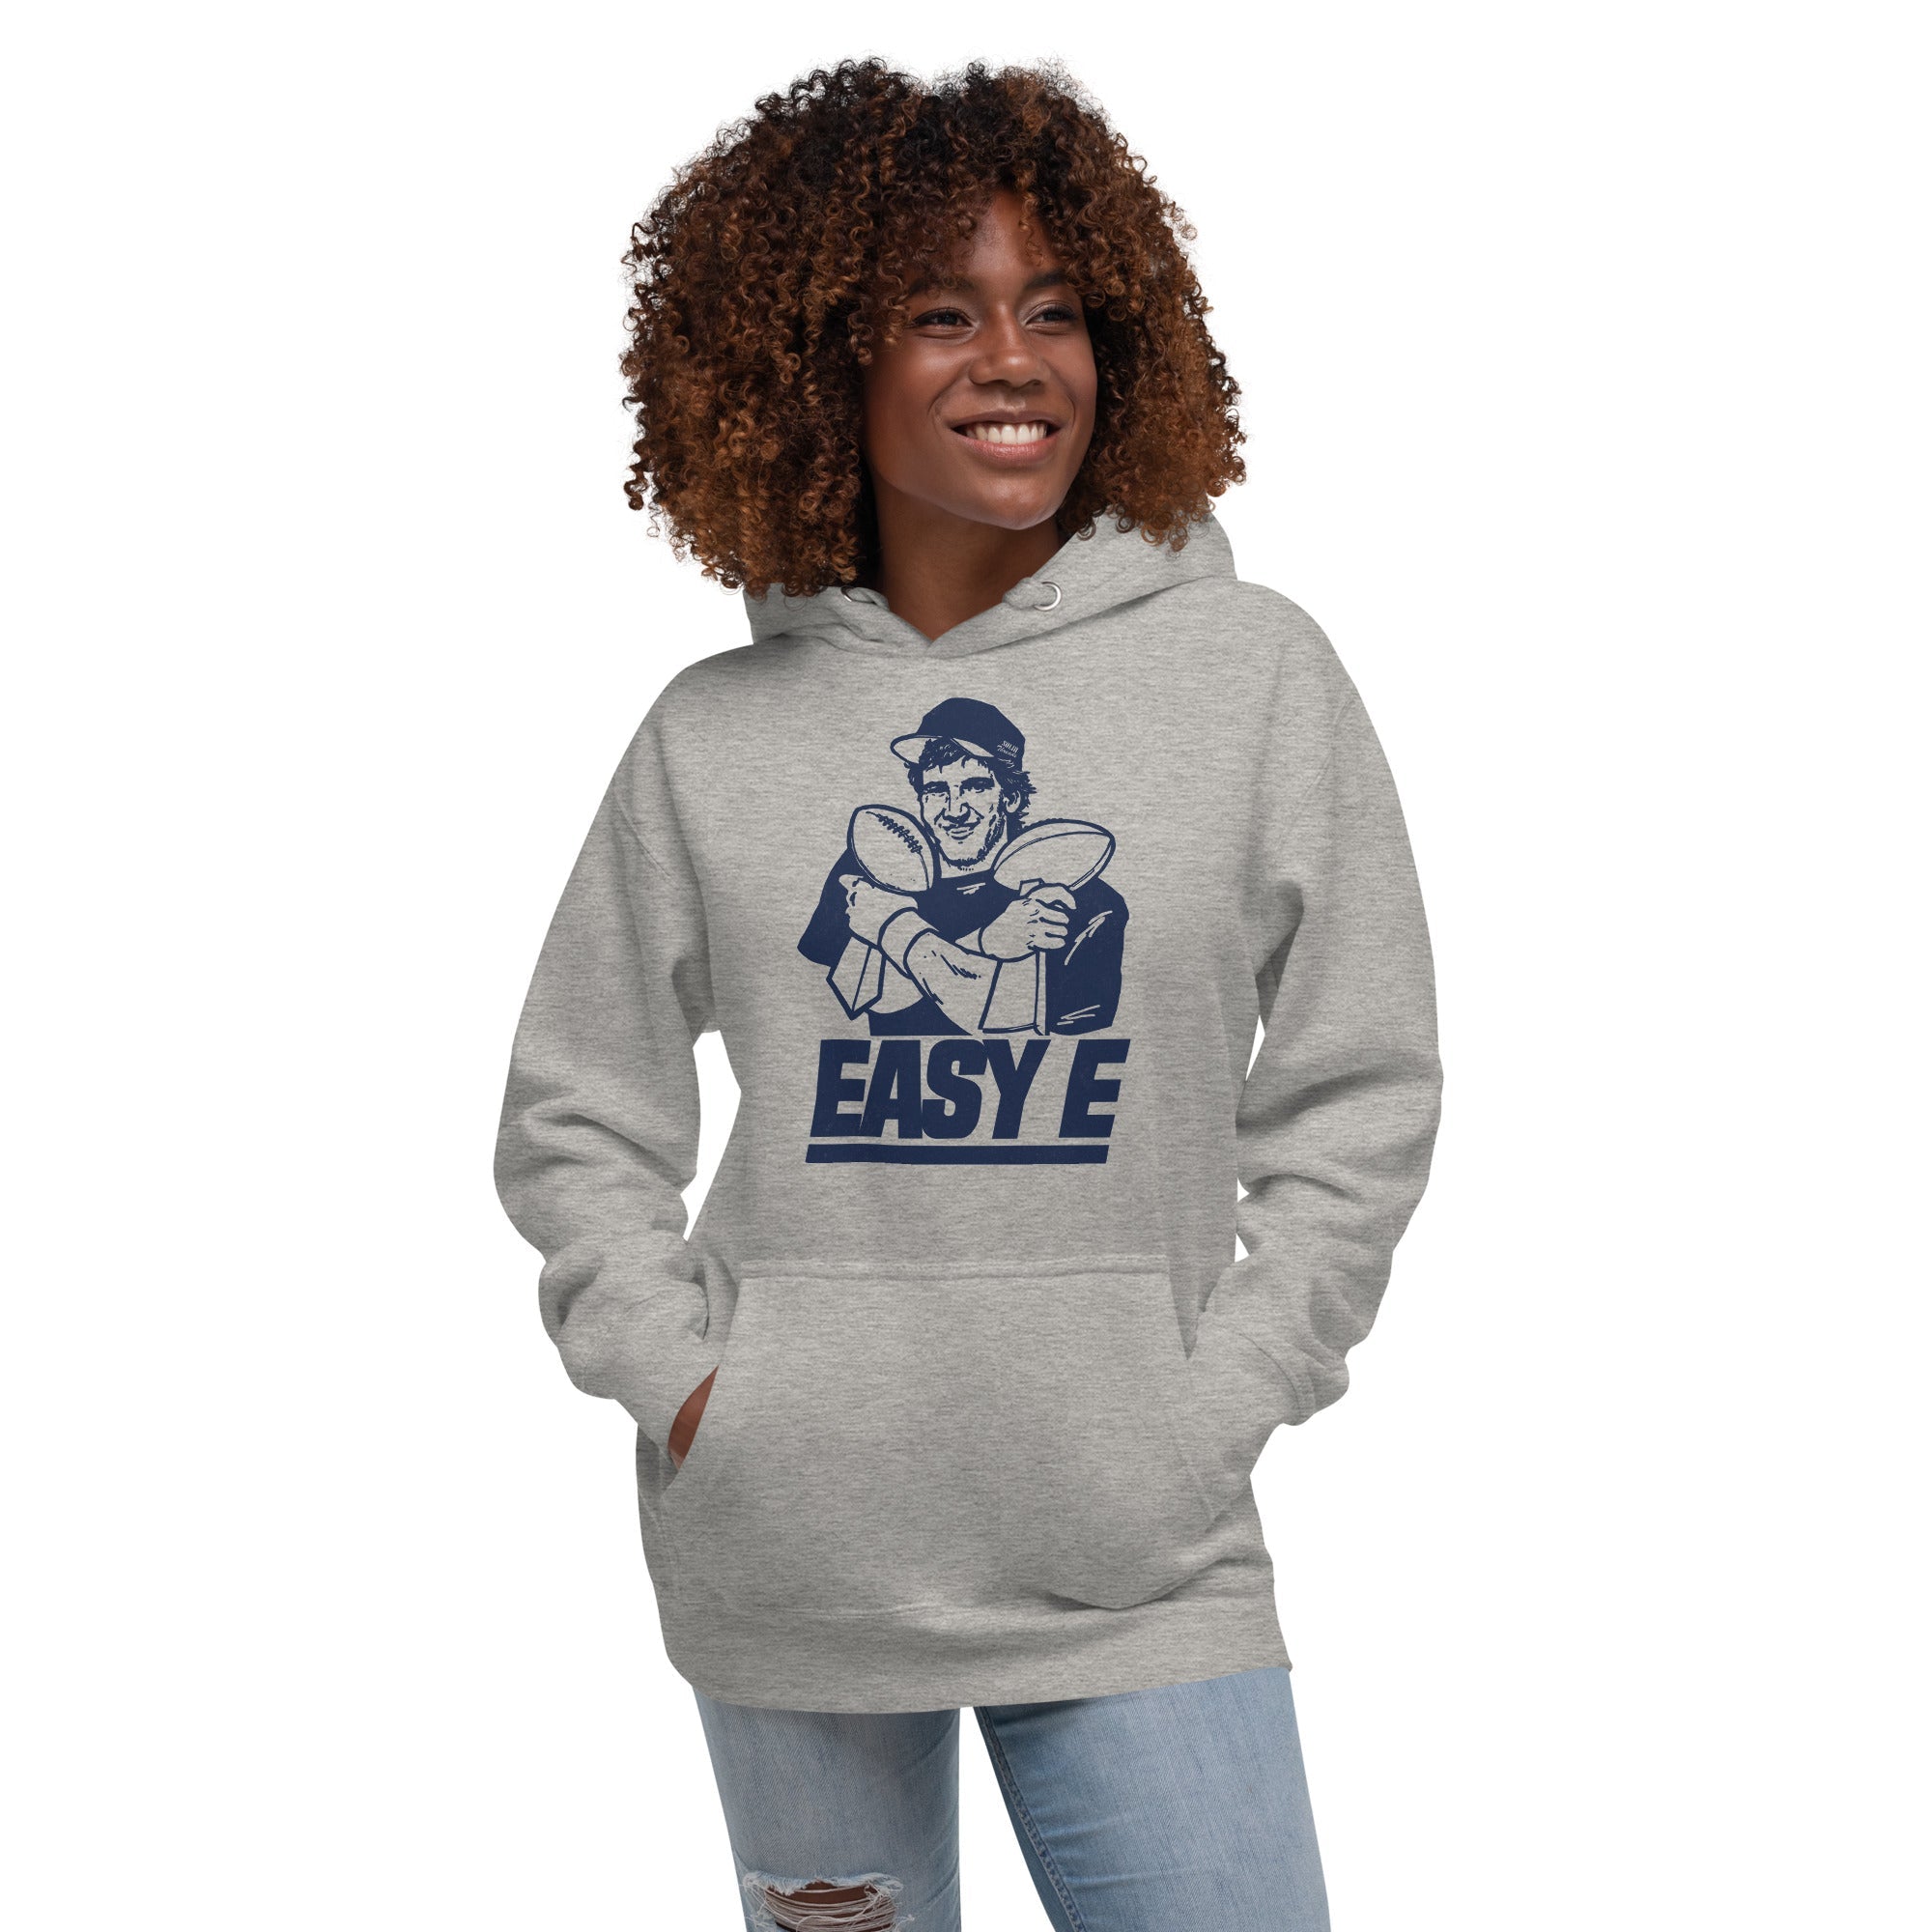 Easy E Vintage Classic Pullover Hoodie | Funny Ny Giants Fleece On Model | Solid Threads